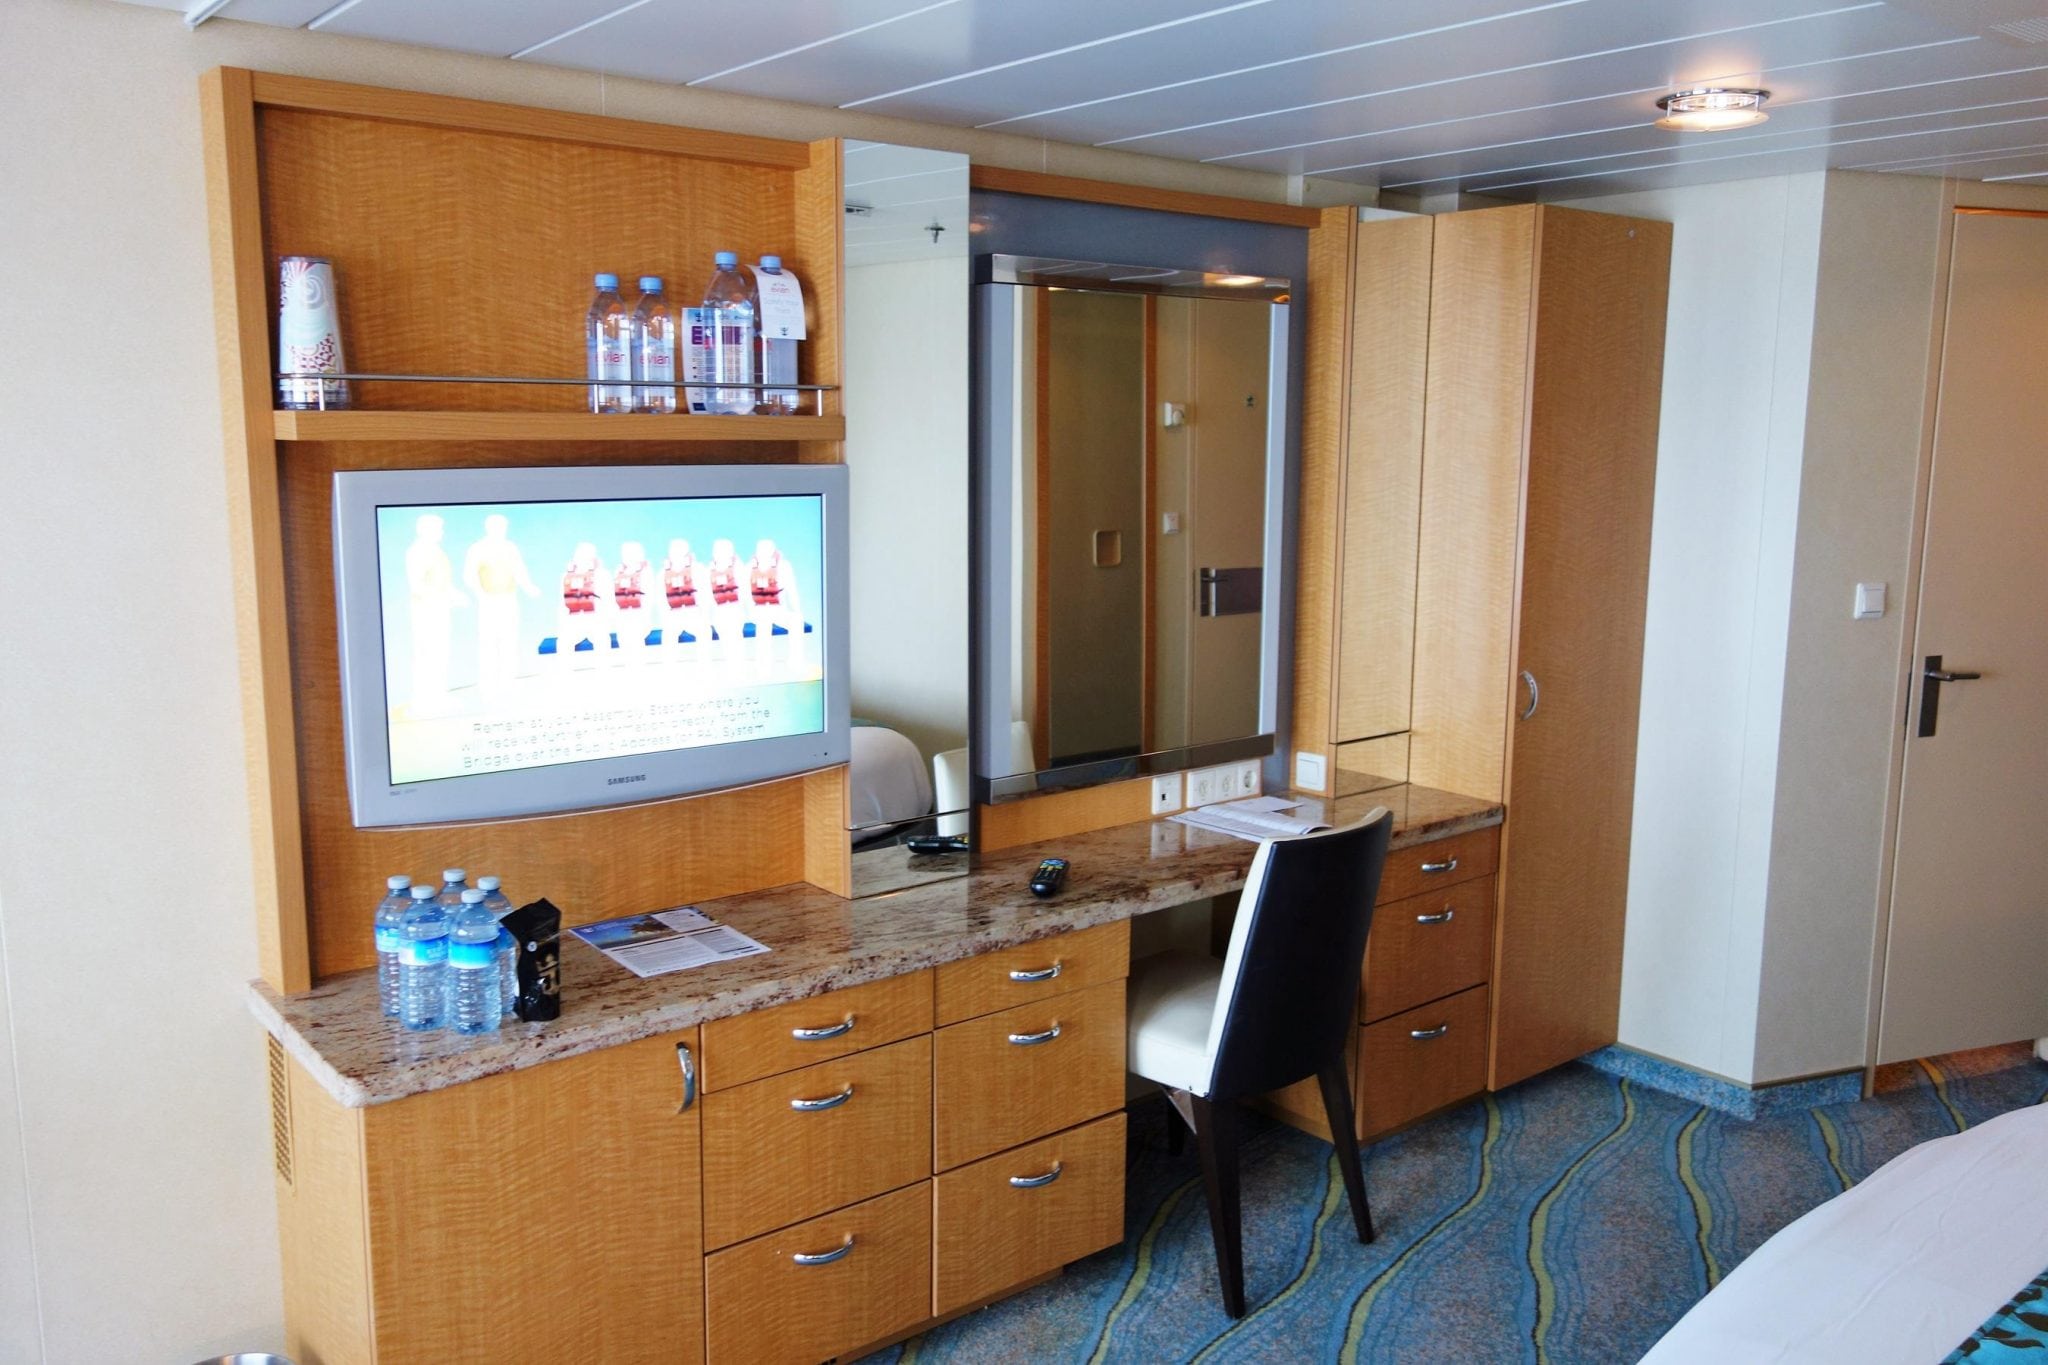 Our Latest Stateroom Review Oasis Of The Seas Junior Suite